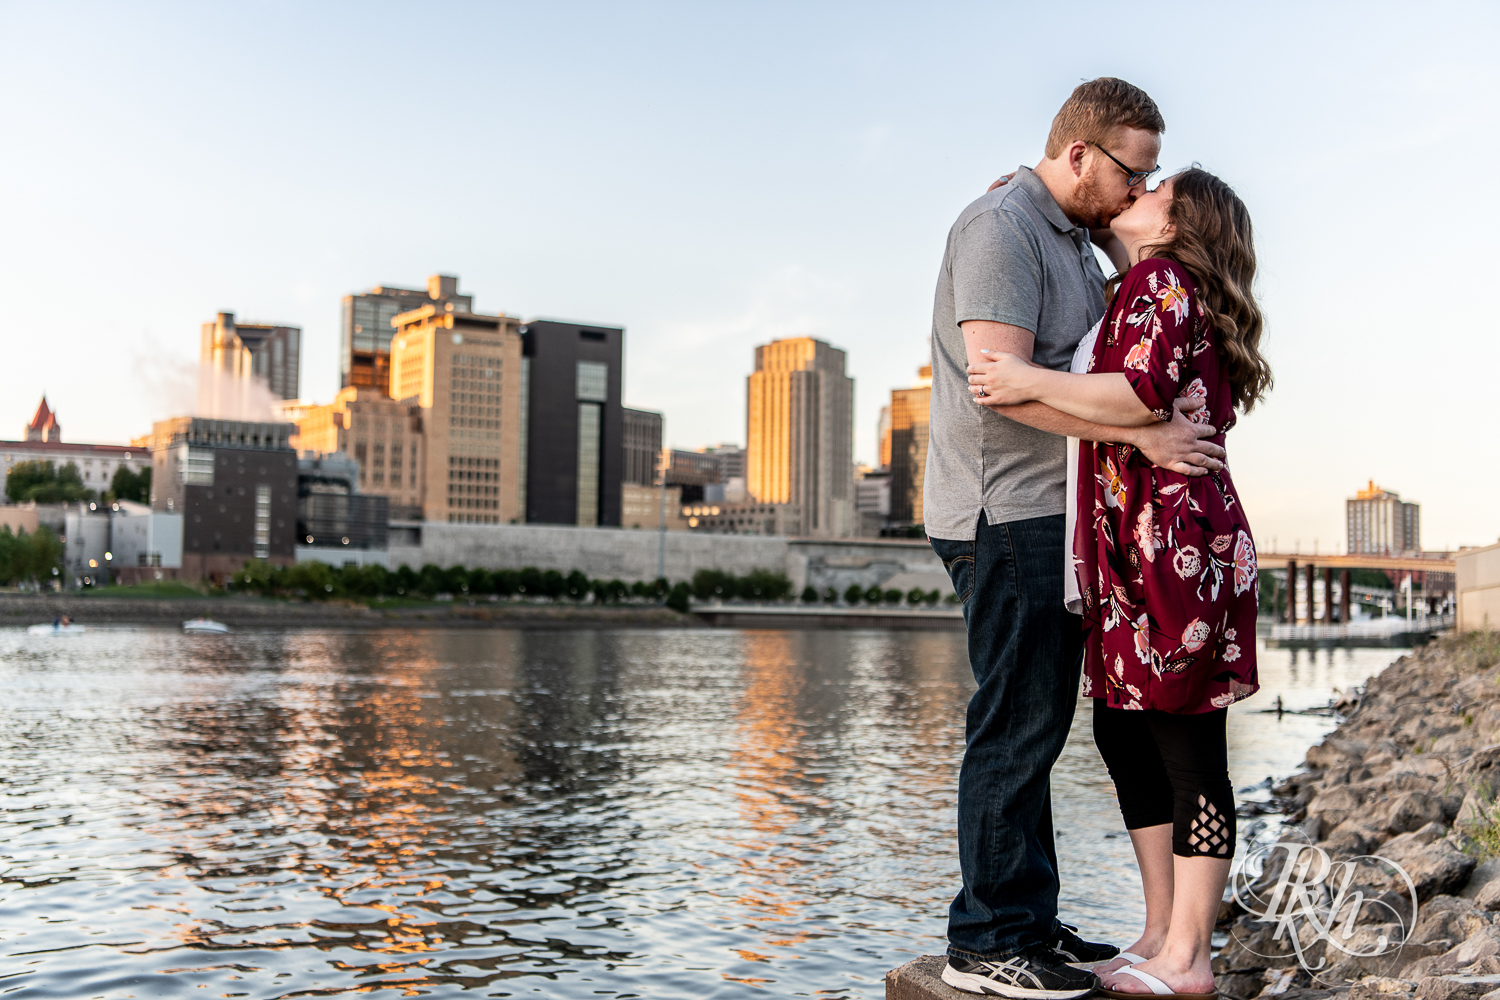 Man and woman kiss with city in background during golden hour on Harriet Island in Saint Paul, Minnesota.